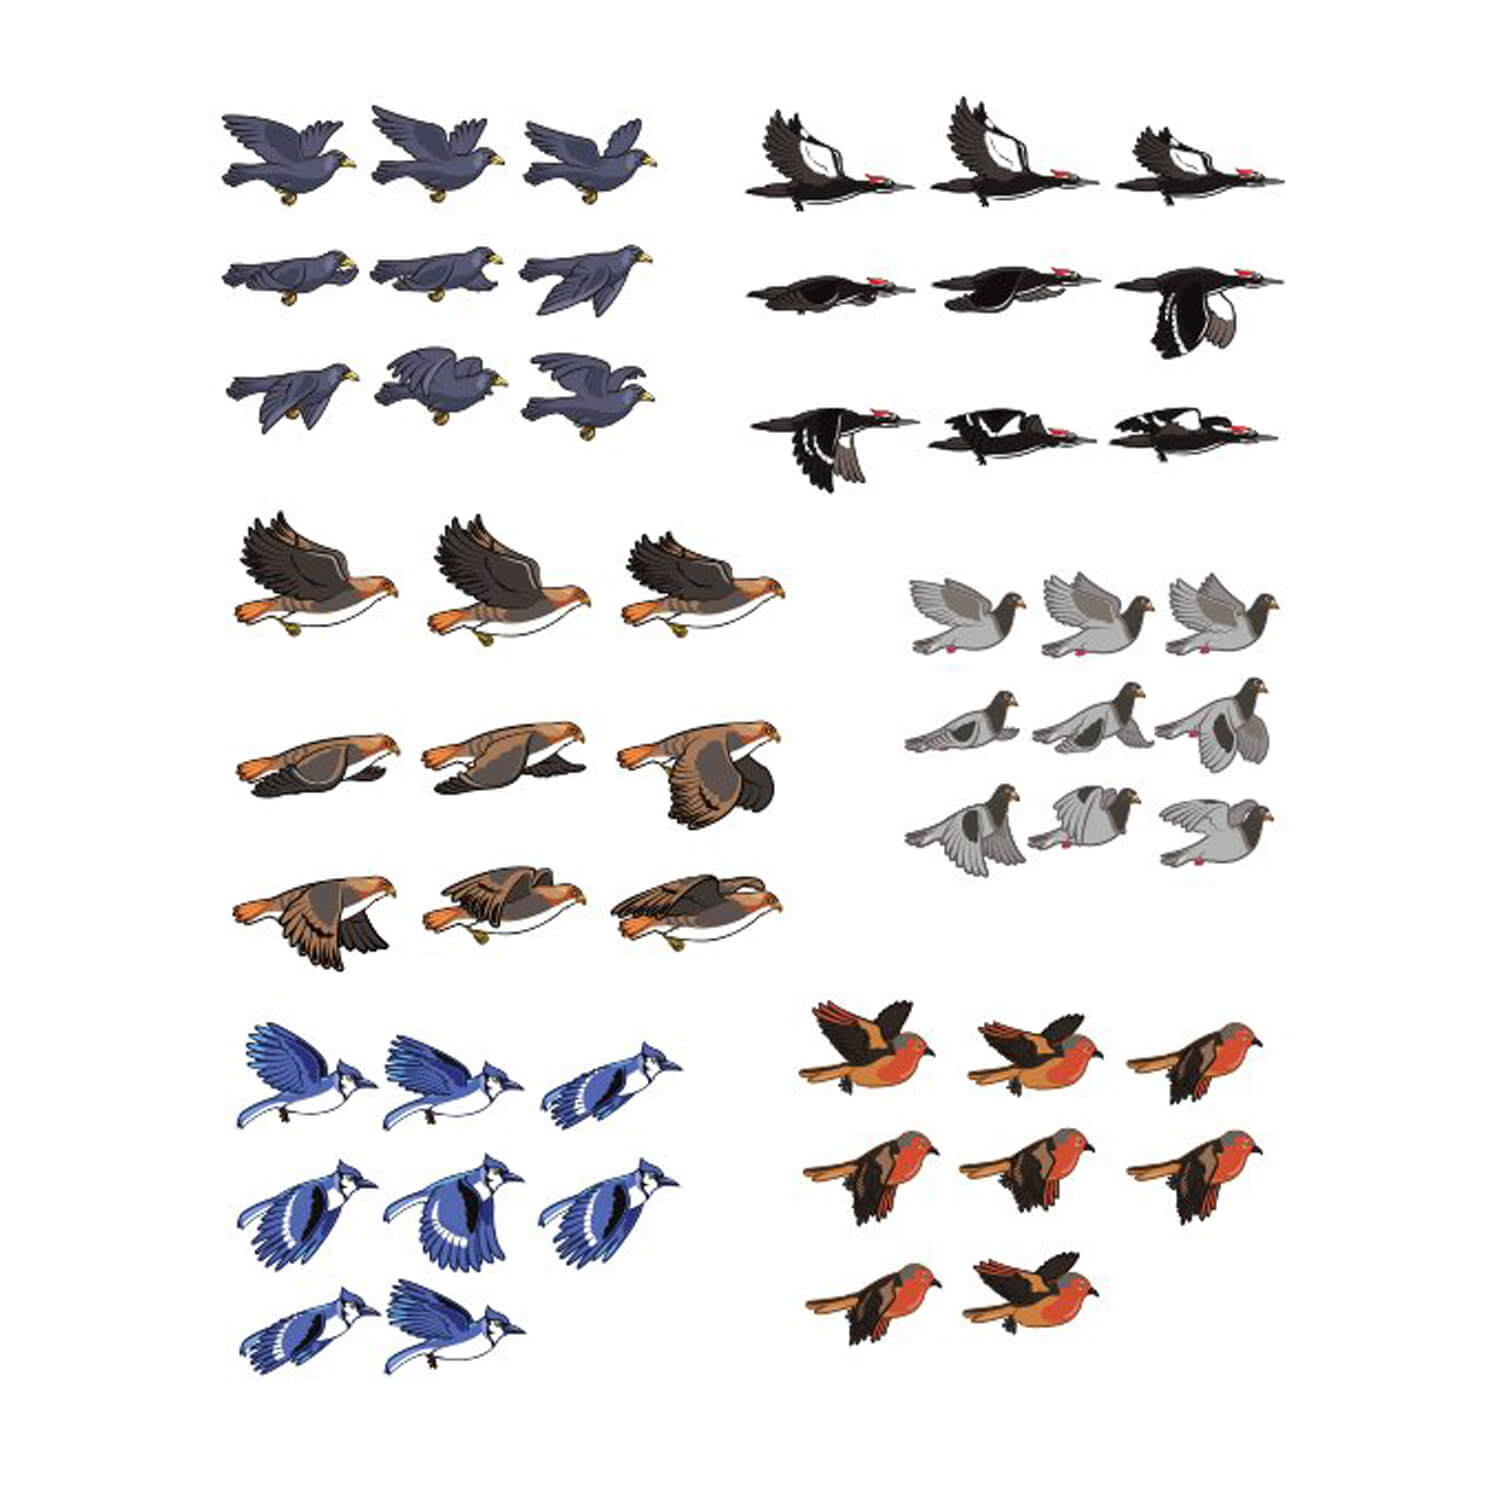 Flying birds of different breeds.